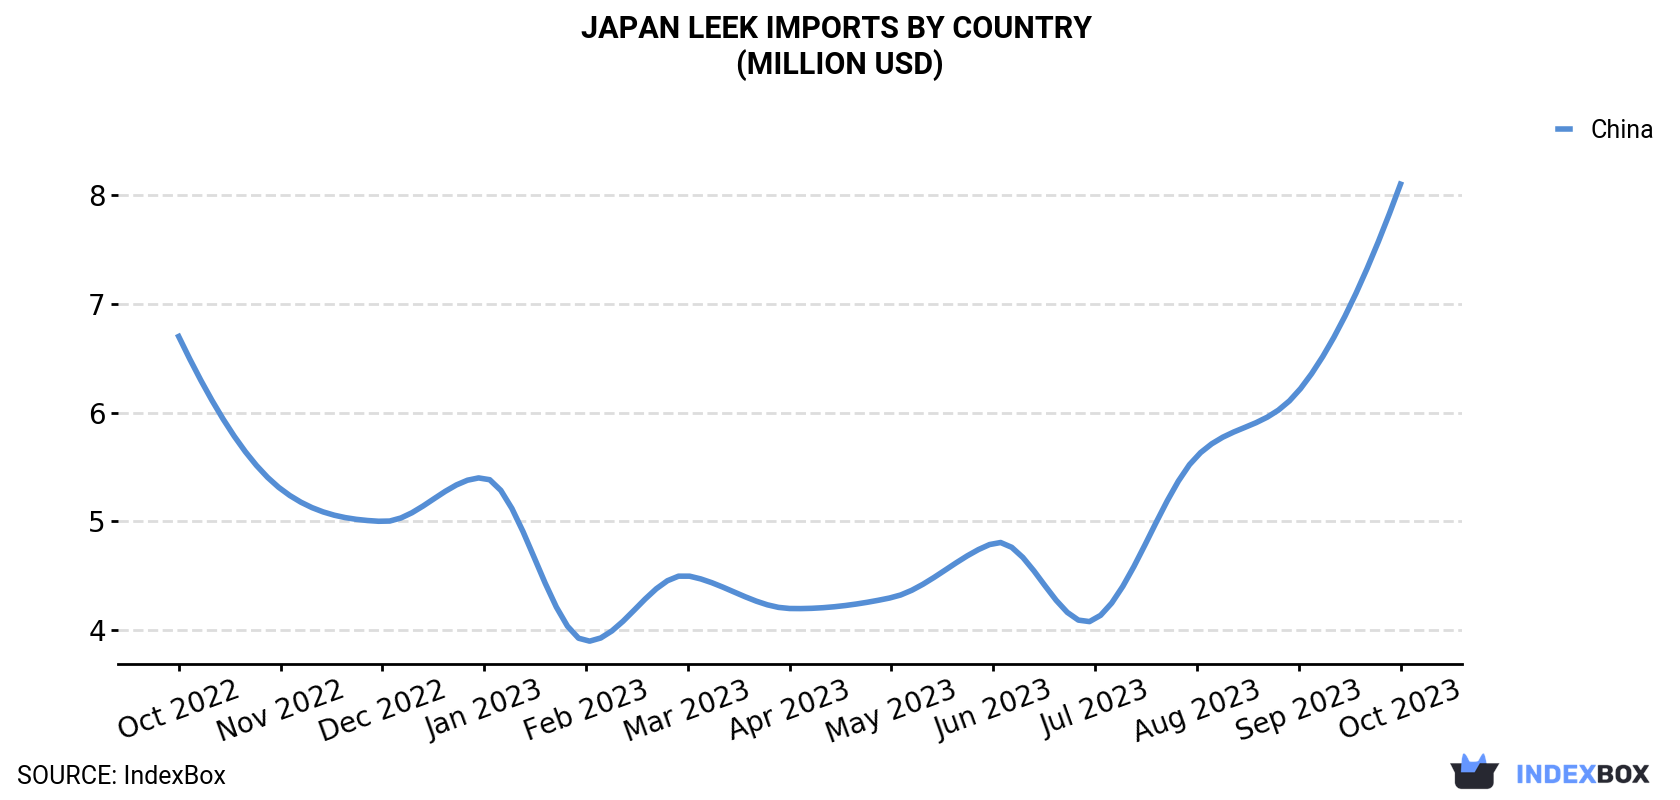 Japan Leek Imports By Country (Million USD)